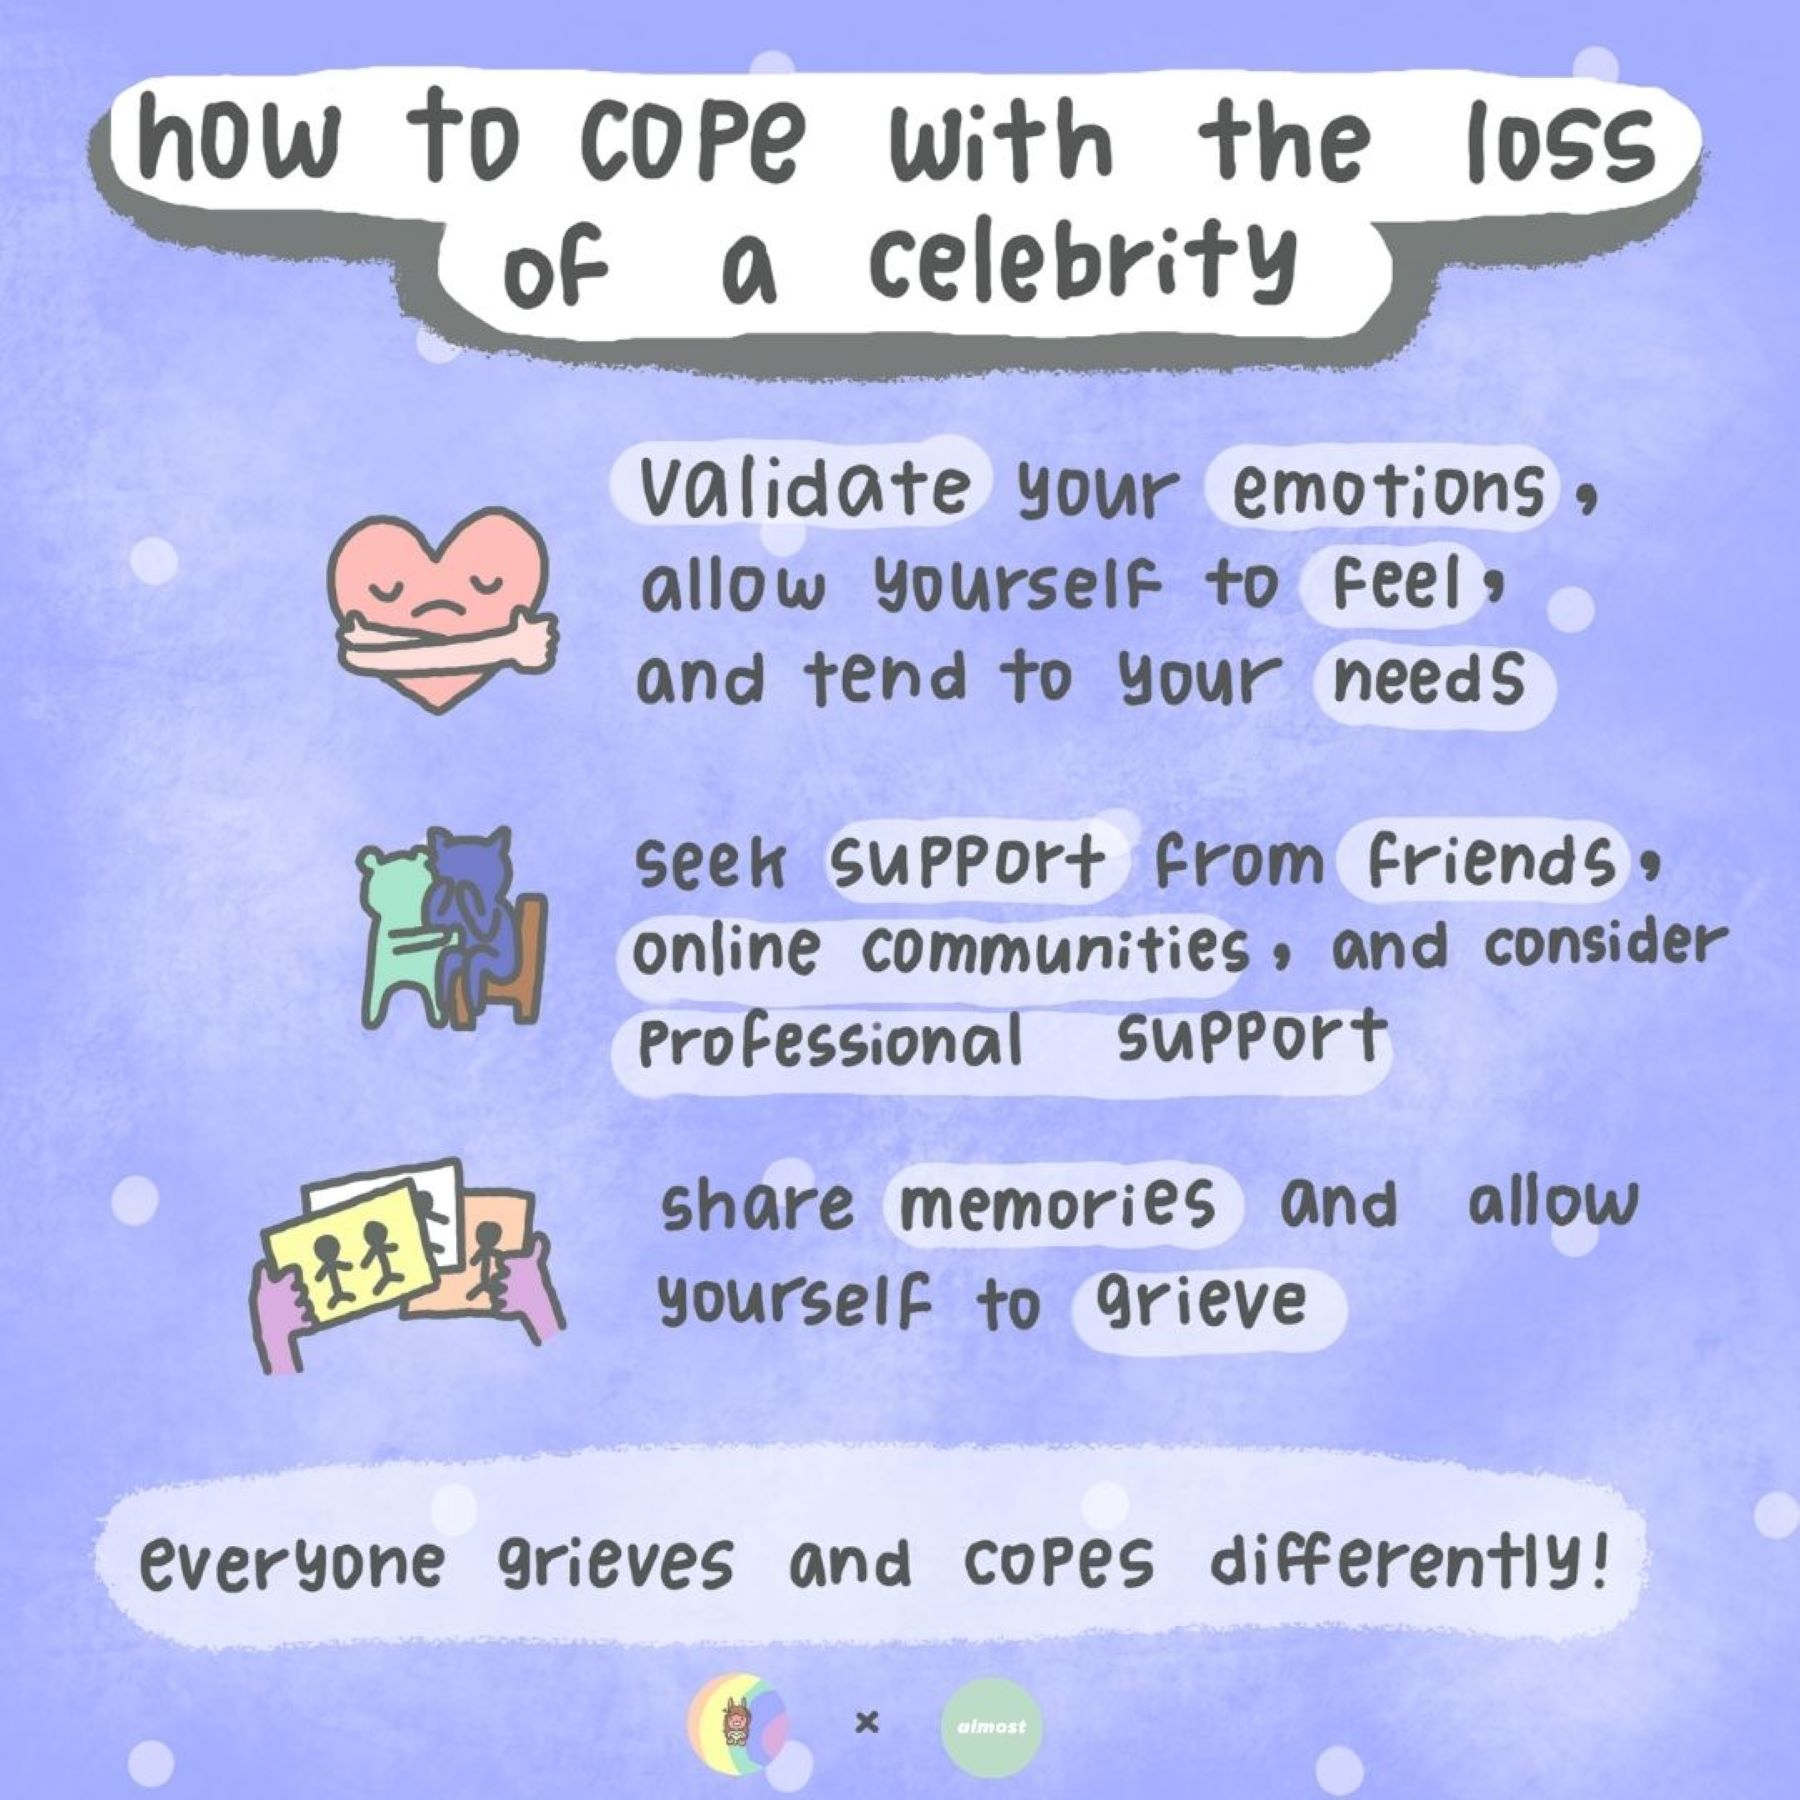 How to cope with the loss of a celebrity